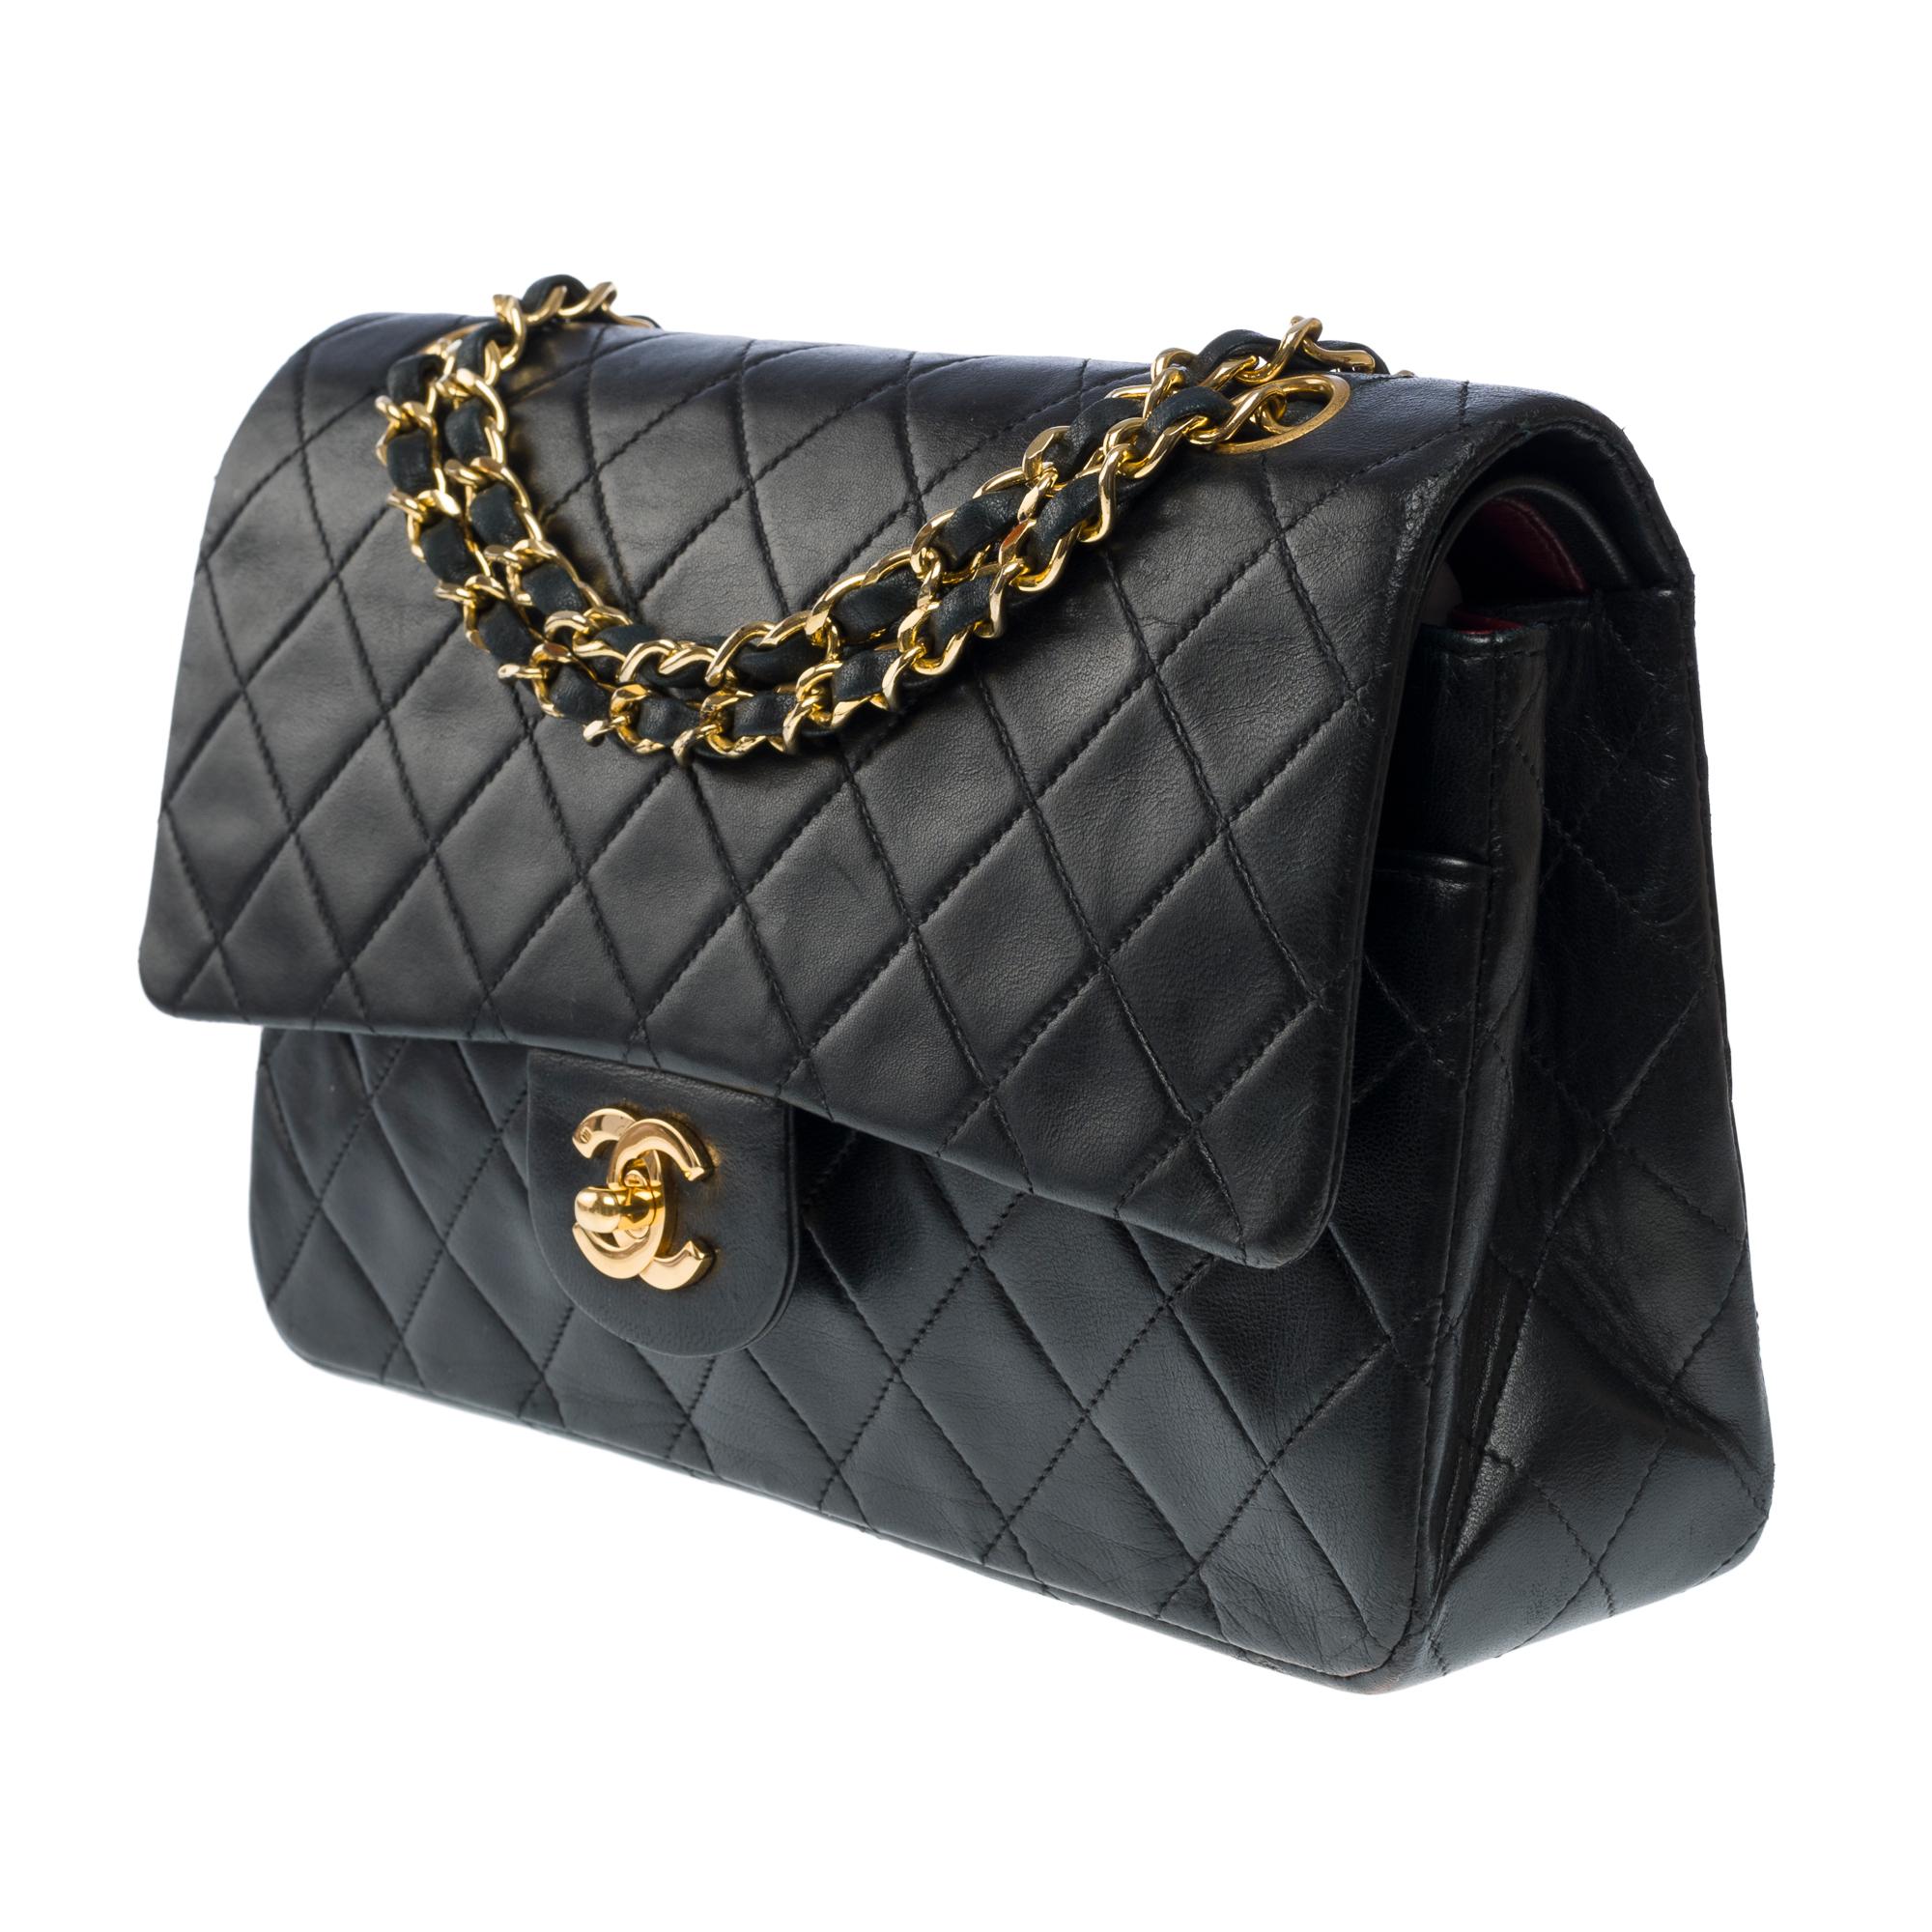 Chanel Timeless double flap shoulder bag in black quilted lambskin leather, GHW For Sale 1